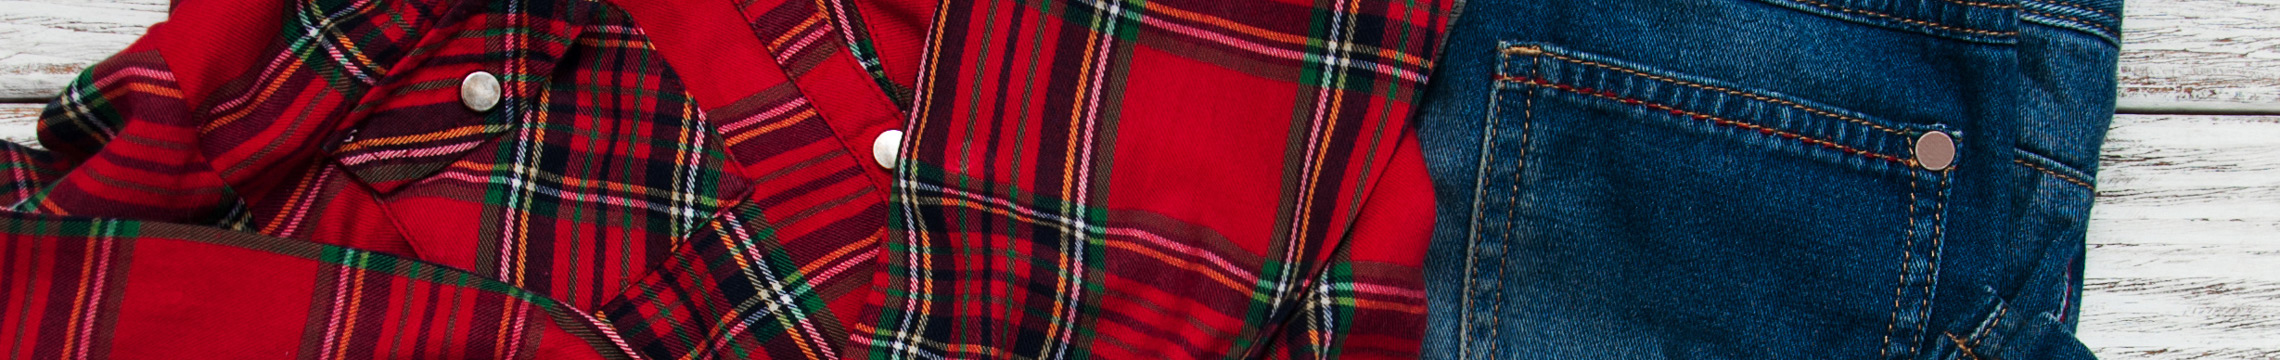 A red plaid shirt is laid out with a pair of blue jeans